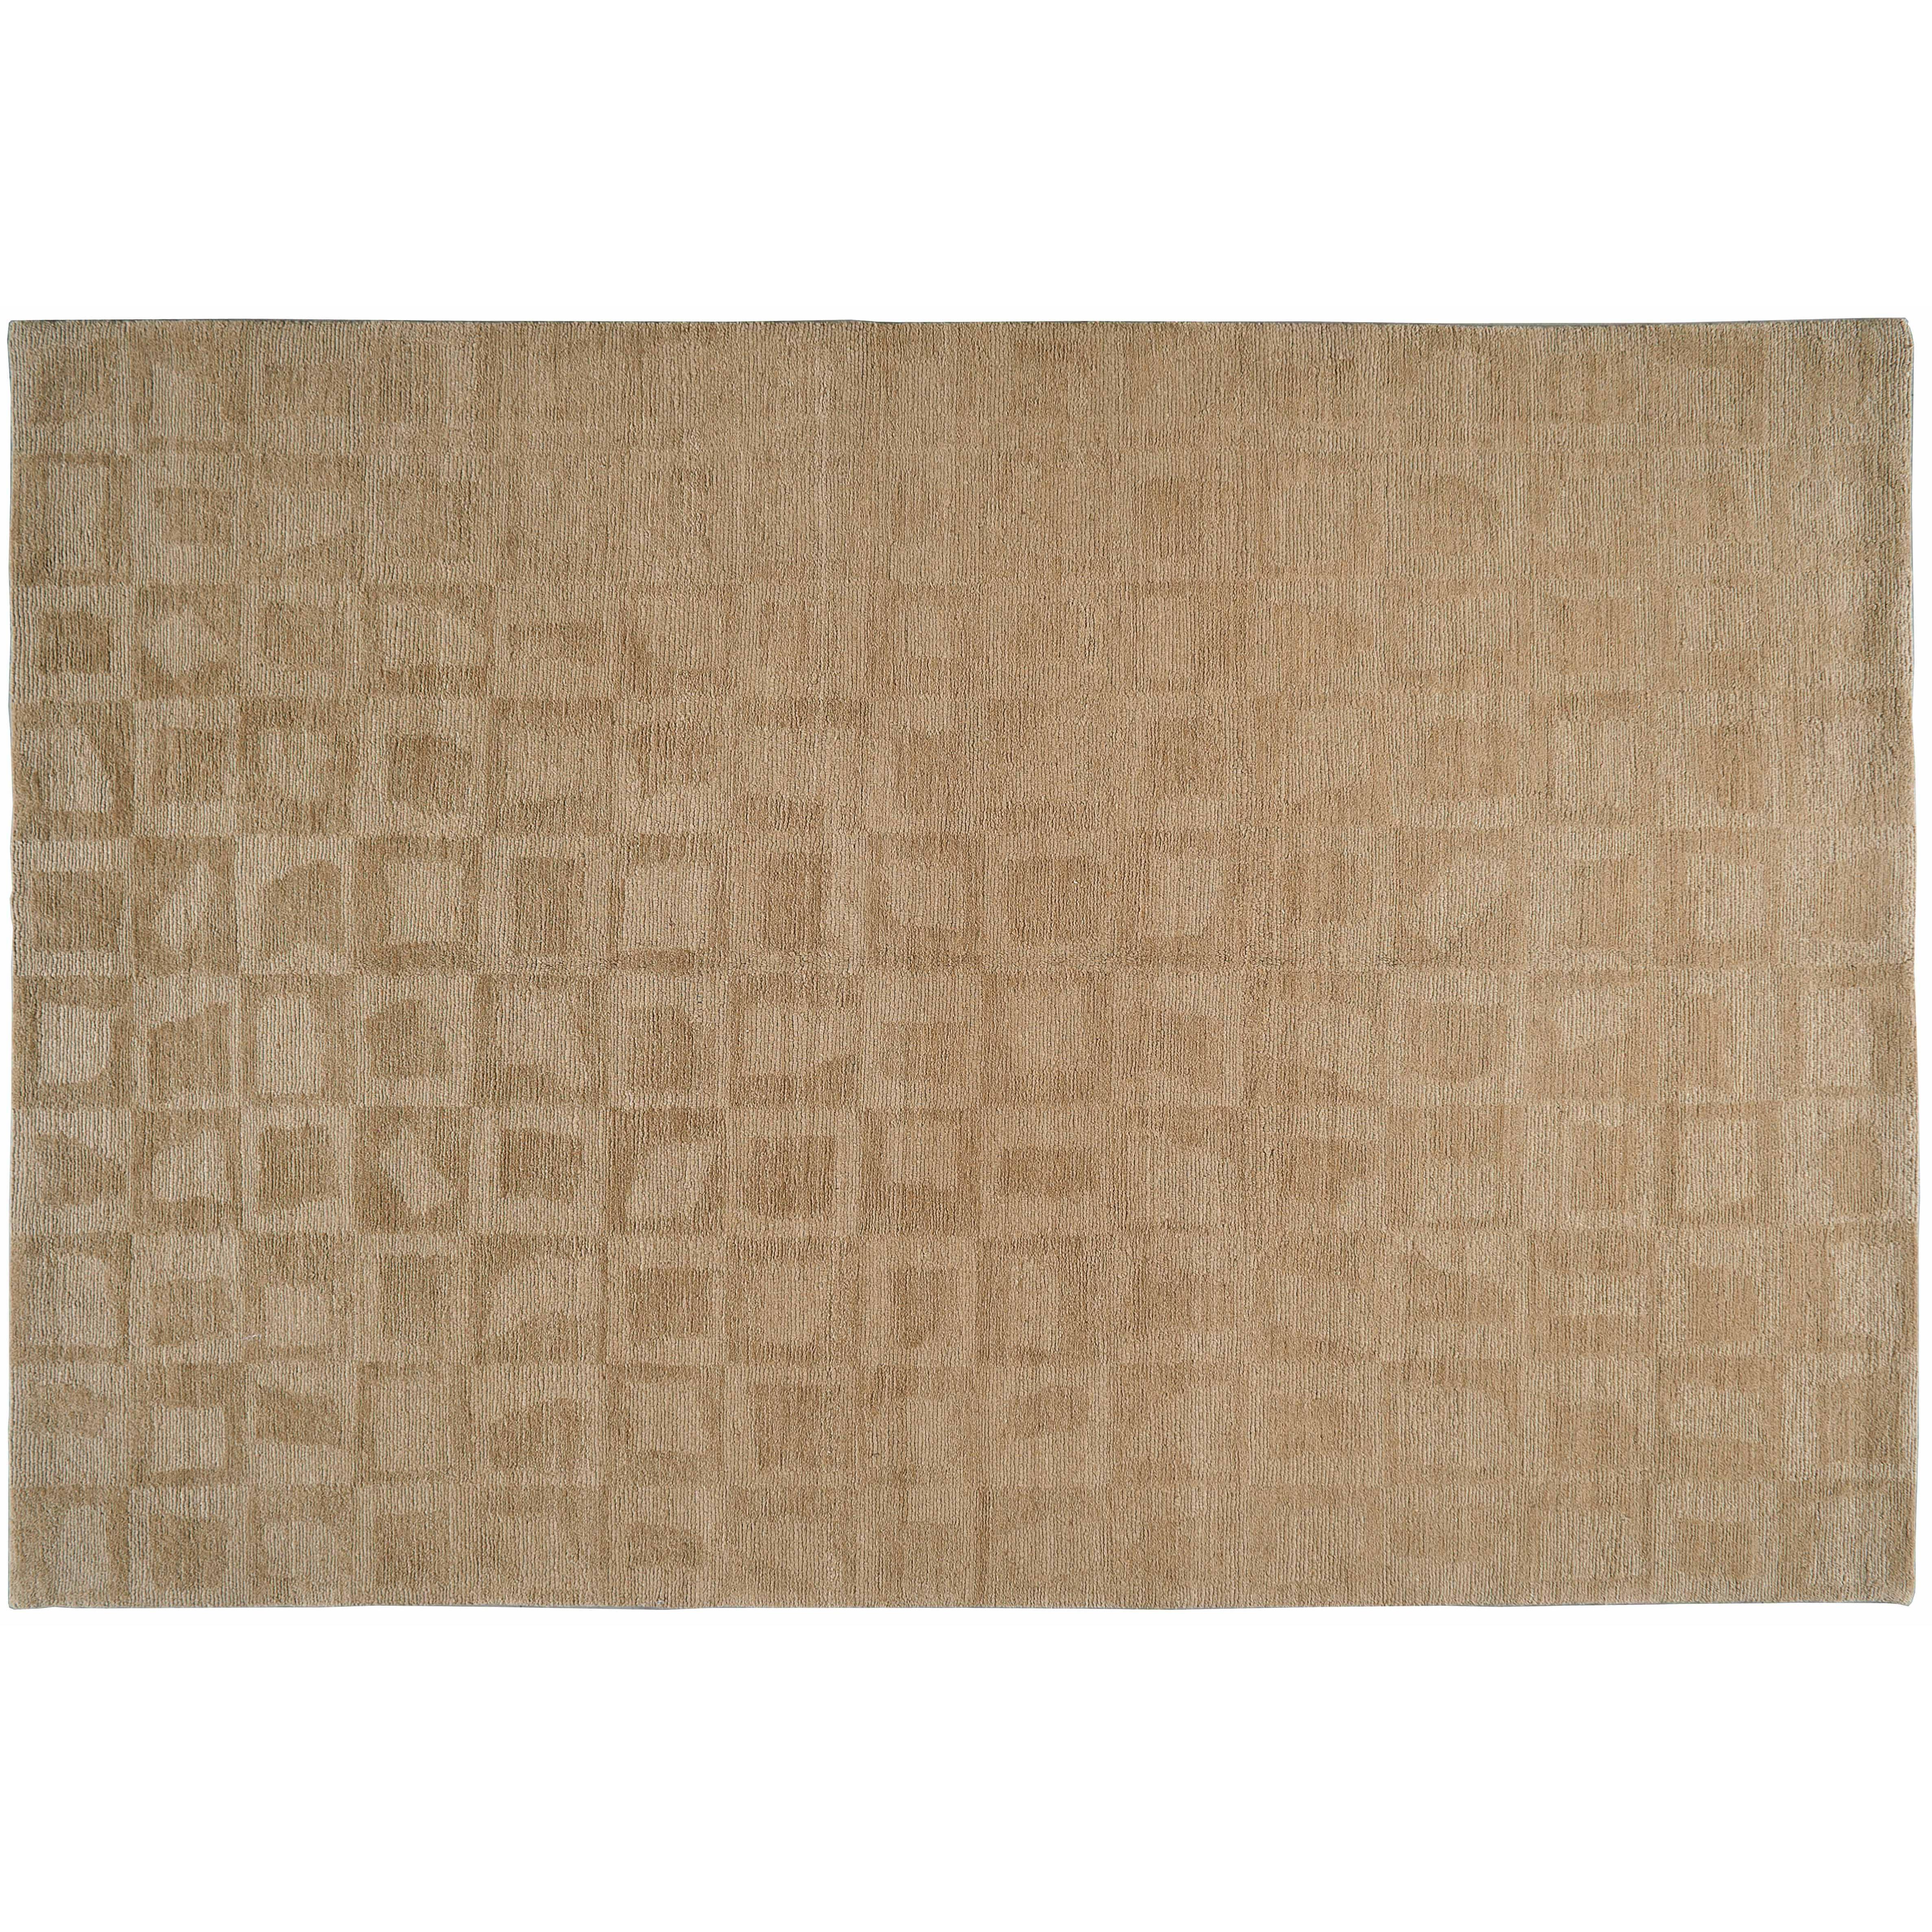 Tone on Tone Rug with Square Details For Sale